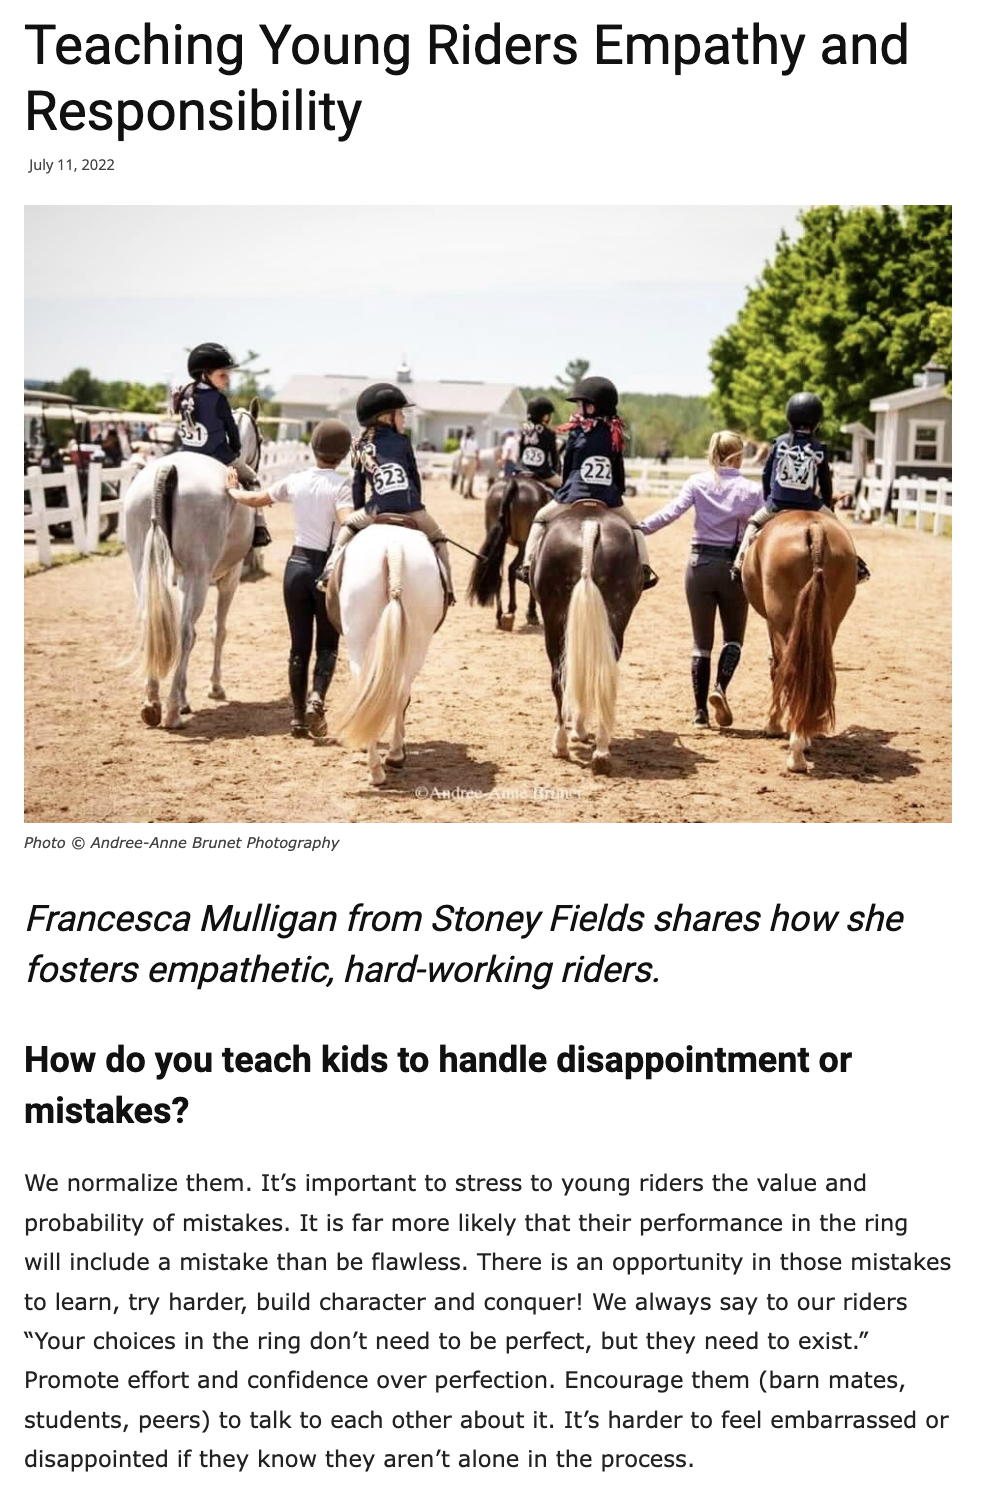 Teaching Young Riders Empathy and Responsibility